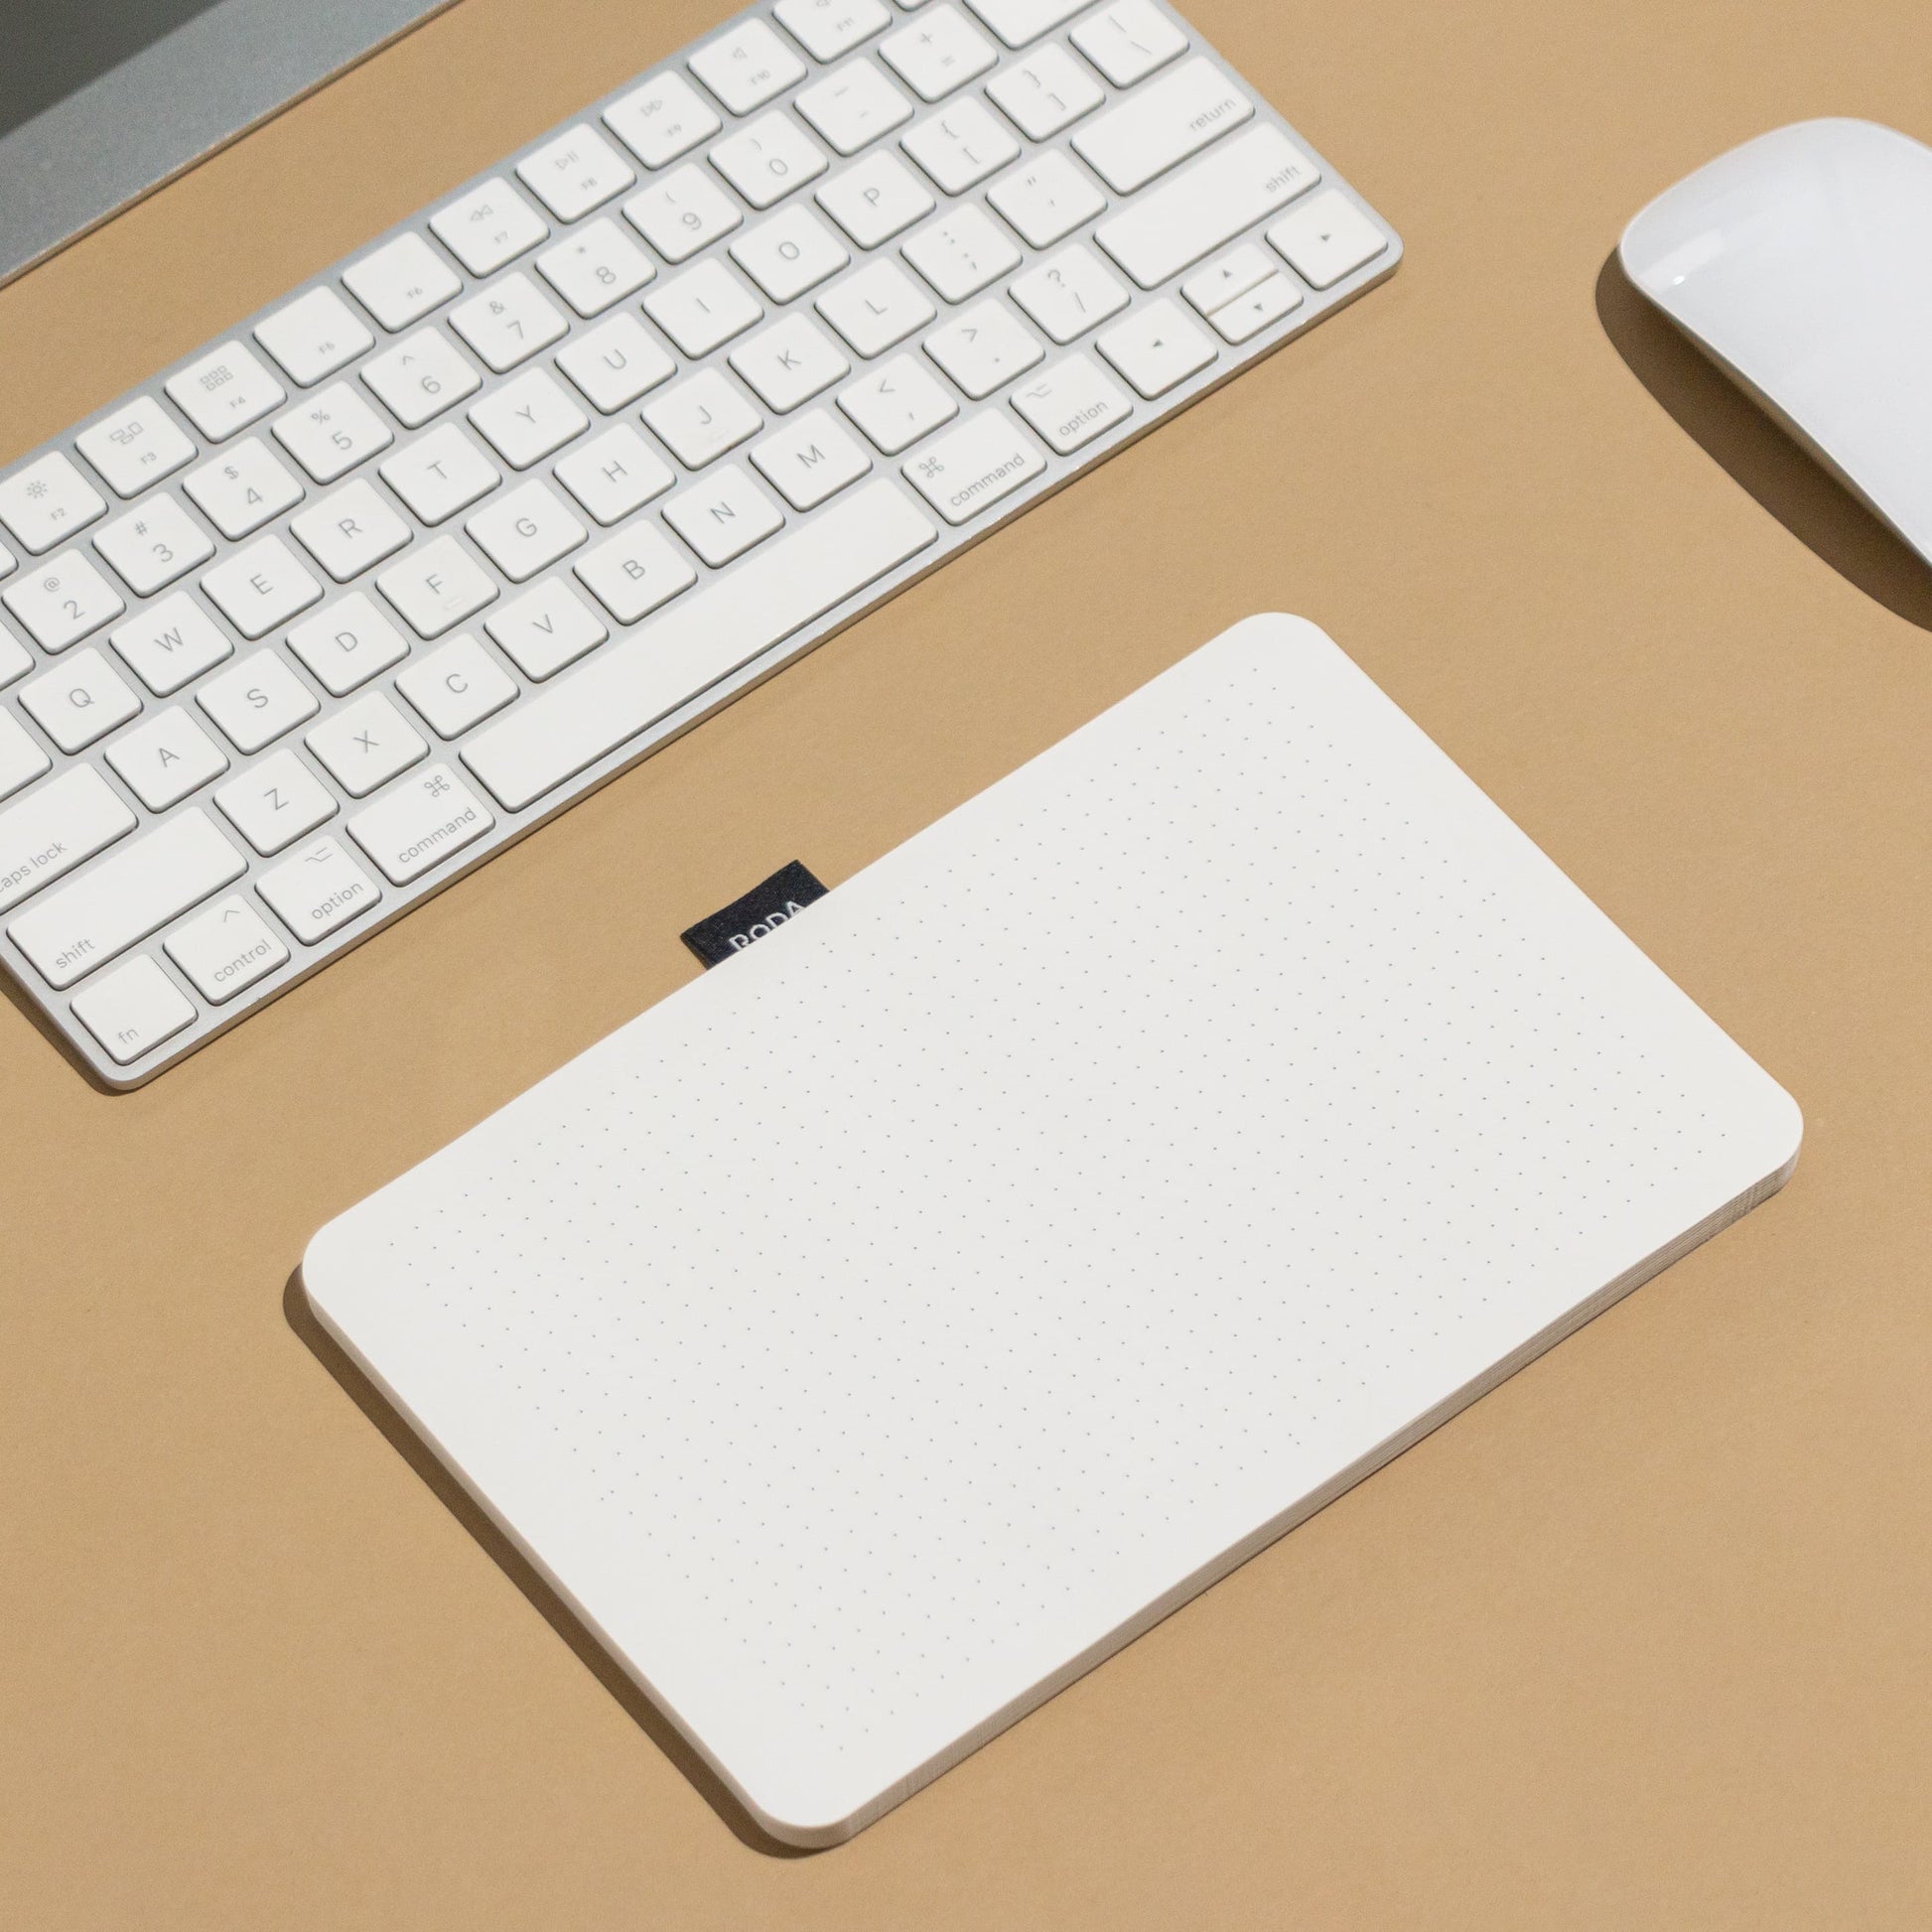 Notepad along with iMac